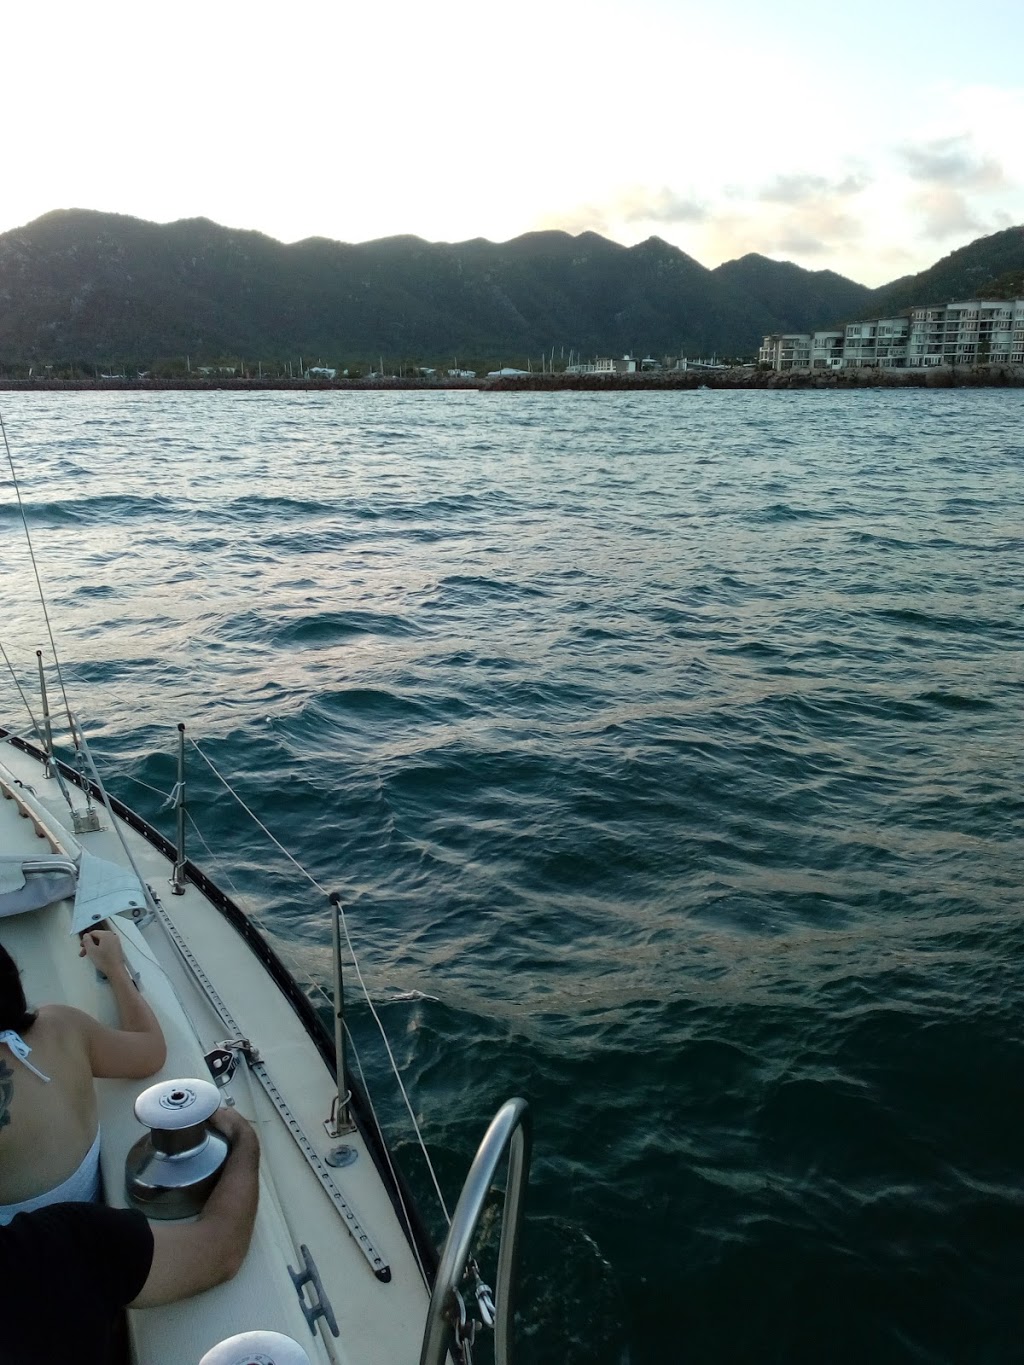 Casual Fare Sailing Charters Magnetic Island | travel agency | magnetic island marina, 123 Sooning St, Nelly Bay QLD 4819, Australia | 0459270557 OR +61 459 270 557